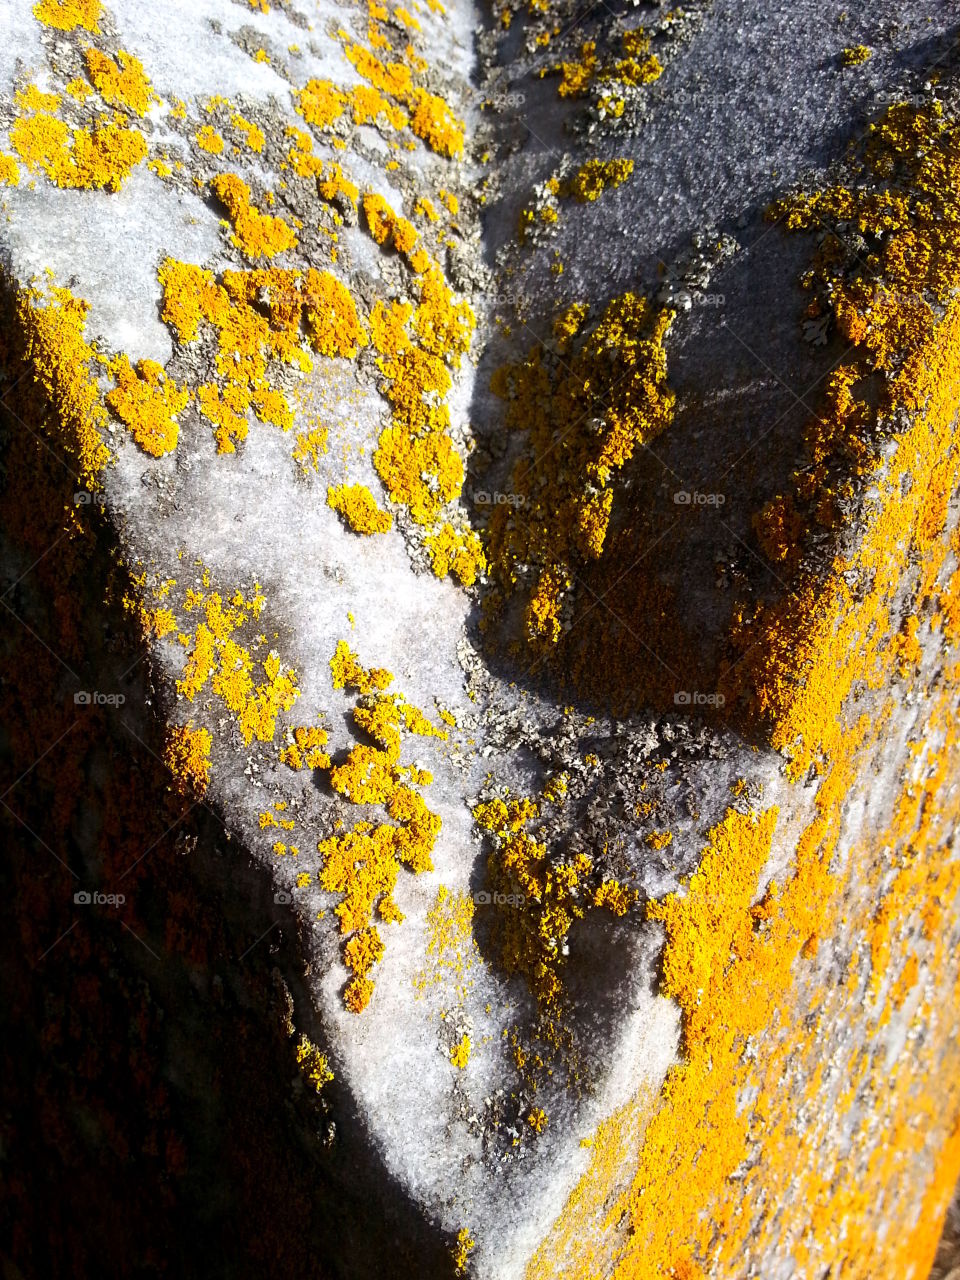 lichen on the tombstone. my kids and I went walking in an old cemetery. some of the headstones were broken and illegible, but there were some which had grown one with nature.